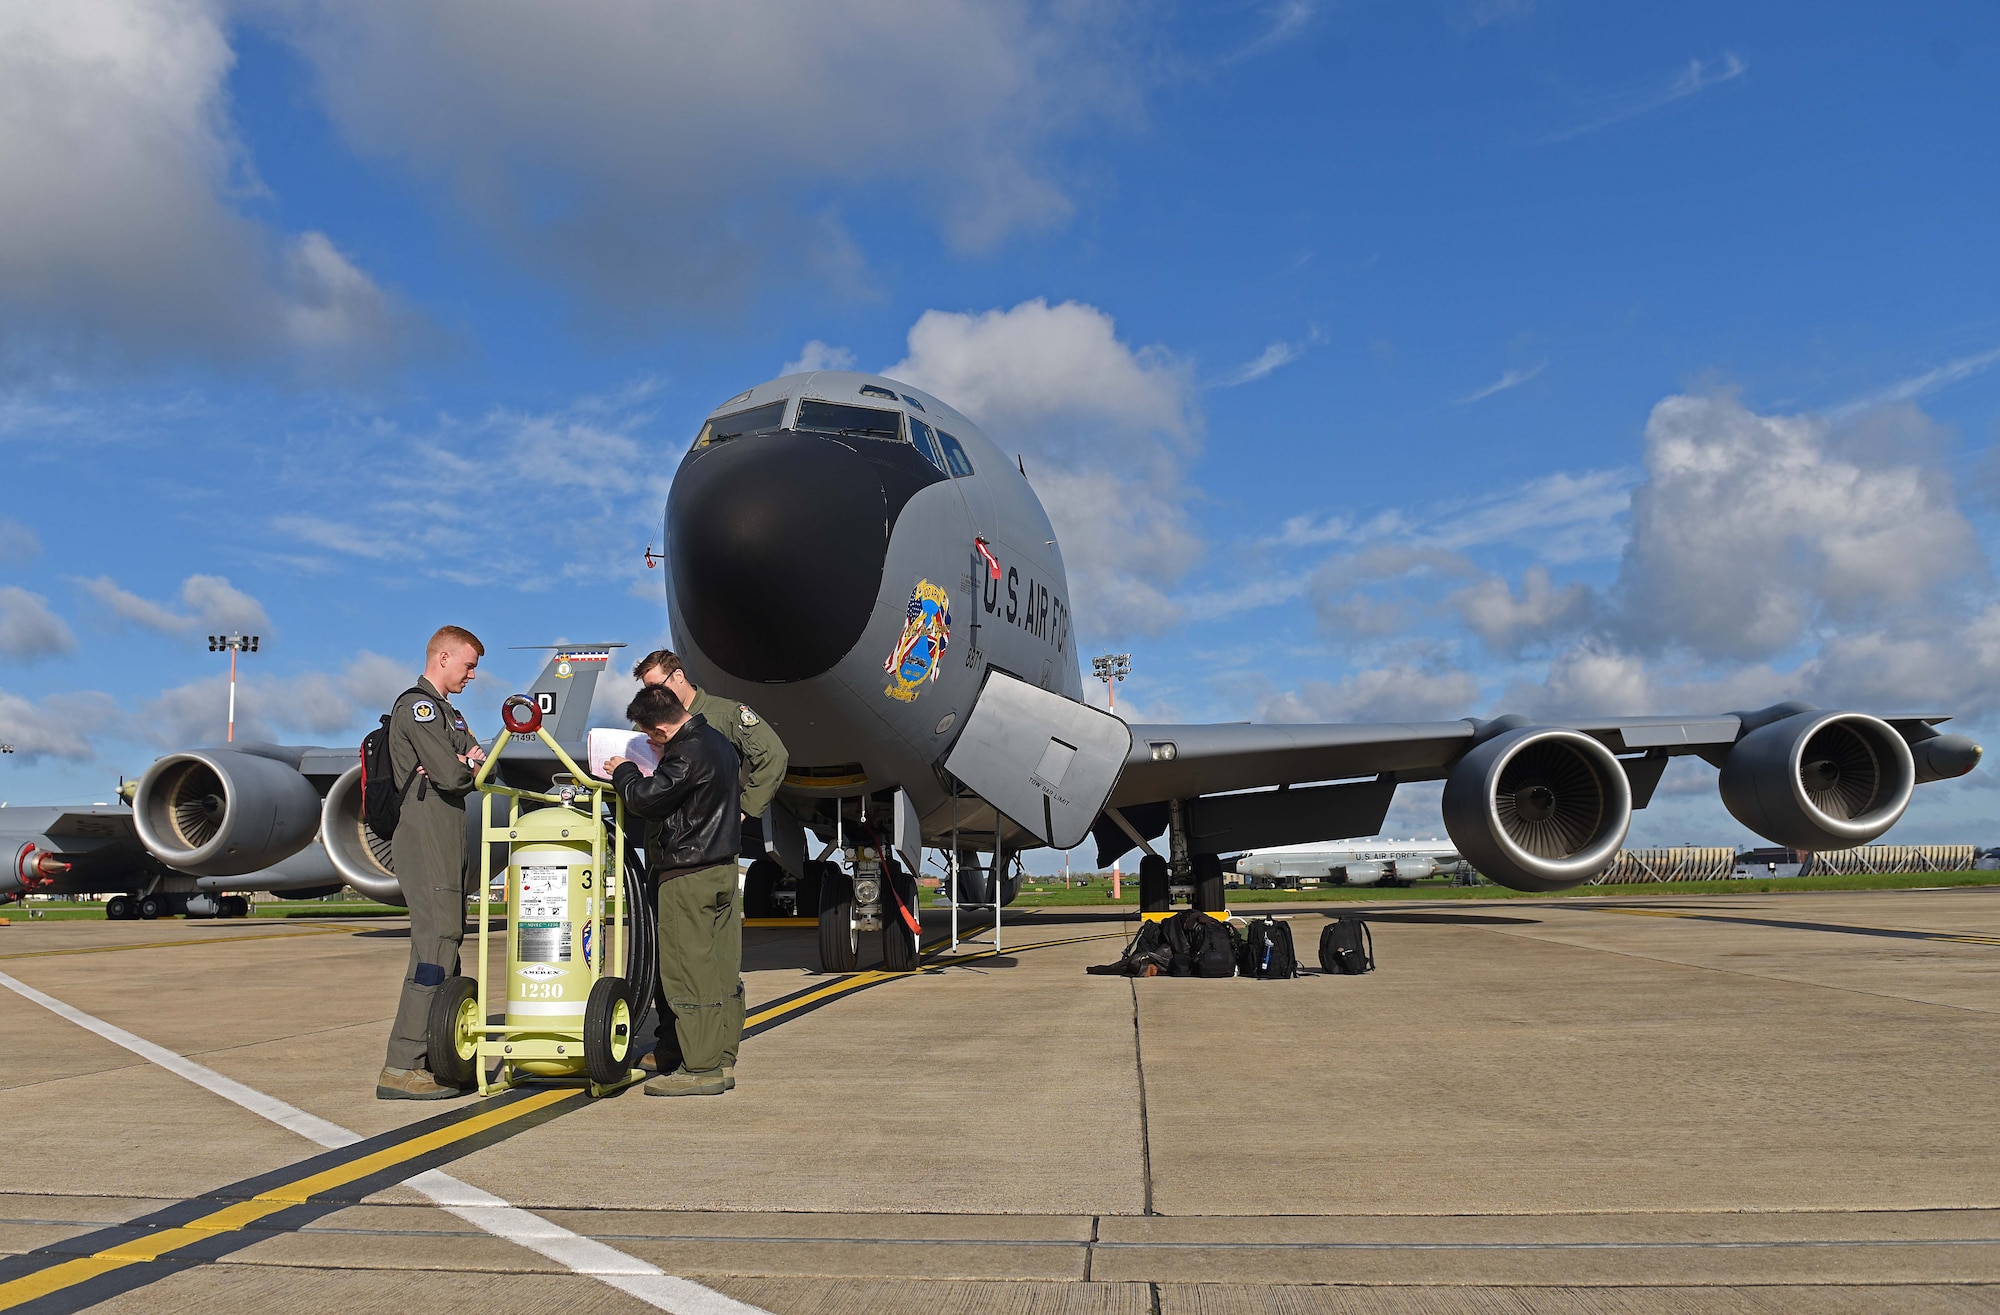 U.S. Air Force Maj. Andrew Johnson, back right, 351st Air Refueling Squadron aircraft commander, briefs his crew before supporting the U.K.-led Exercise Joint Warrior at RAF Mildenhall, England, April 25, 2018. Exercise Joint Warrior is Europe’s largest military exercise involving air, sea and ground components. (U.S. Air Force photo by Senior Airman Luke Milano)